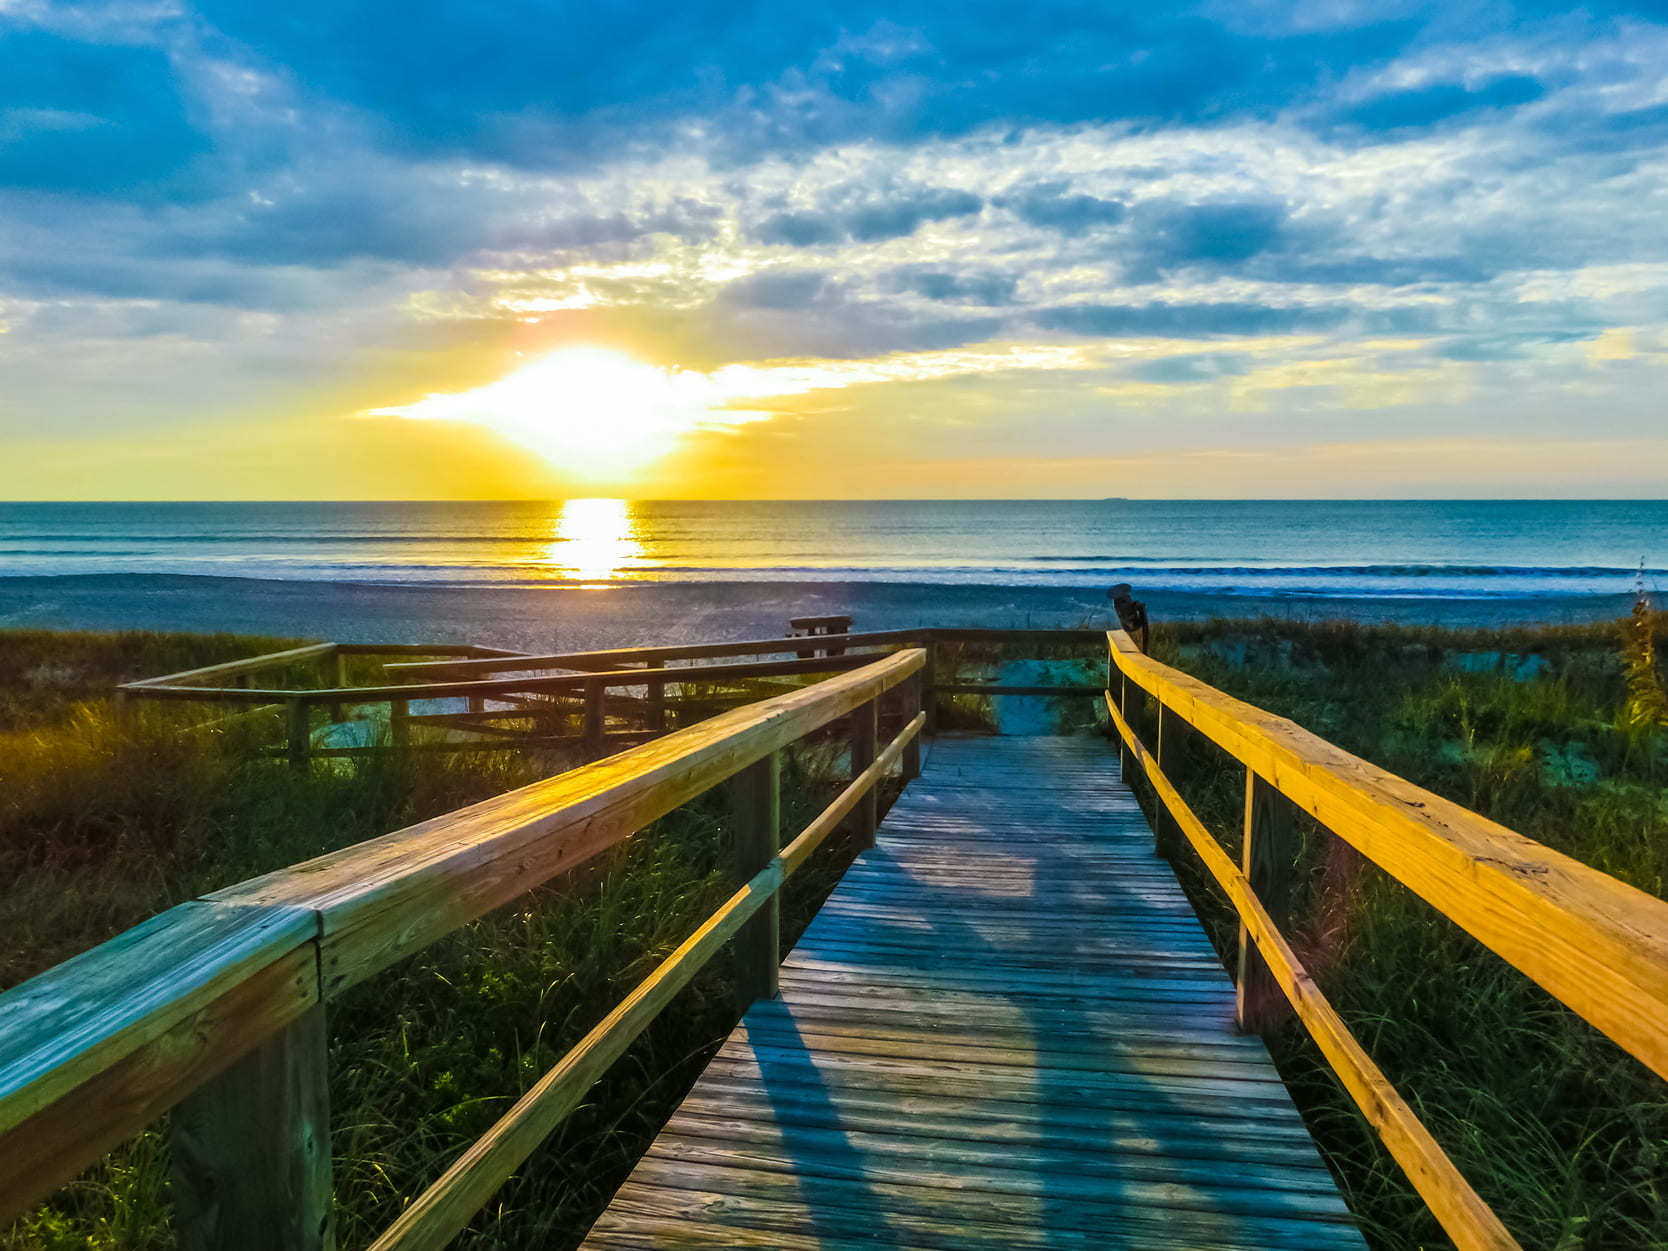 Boardwalk leading to a quiet beach in Florida